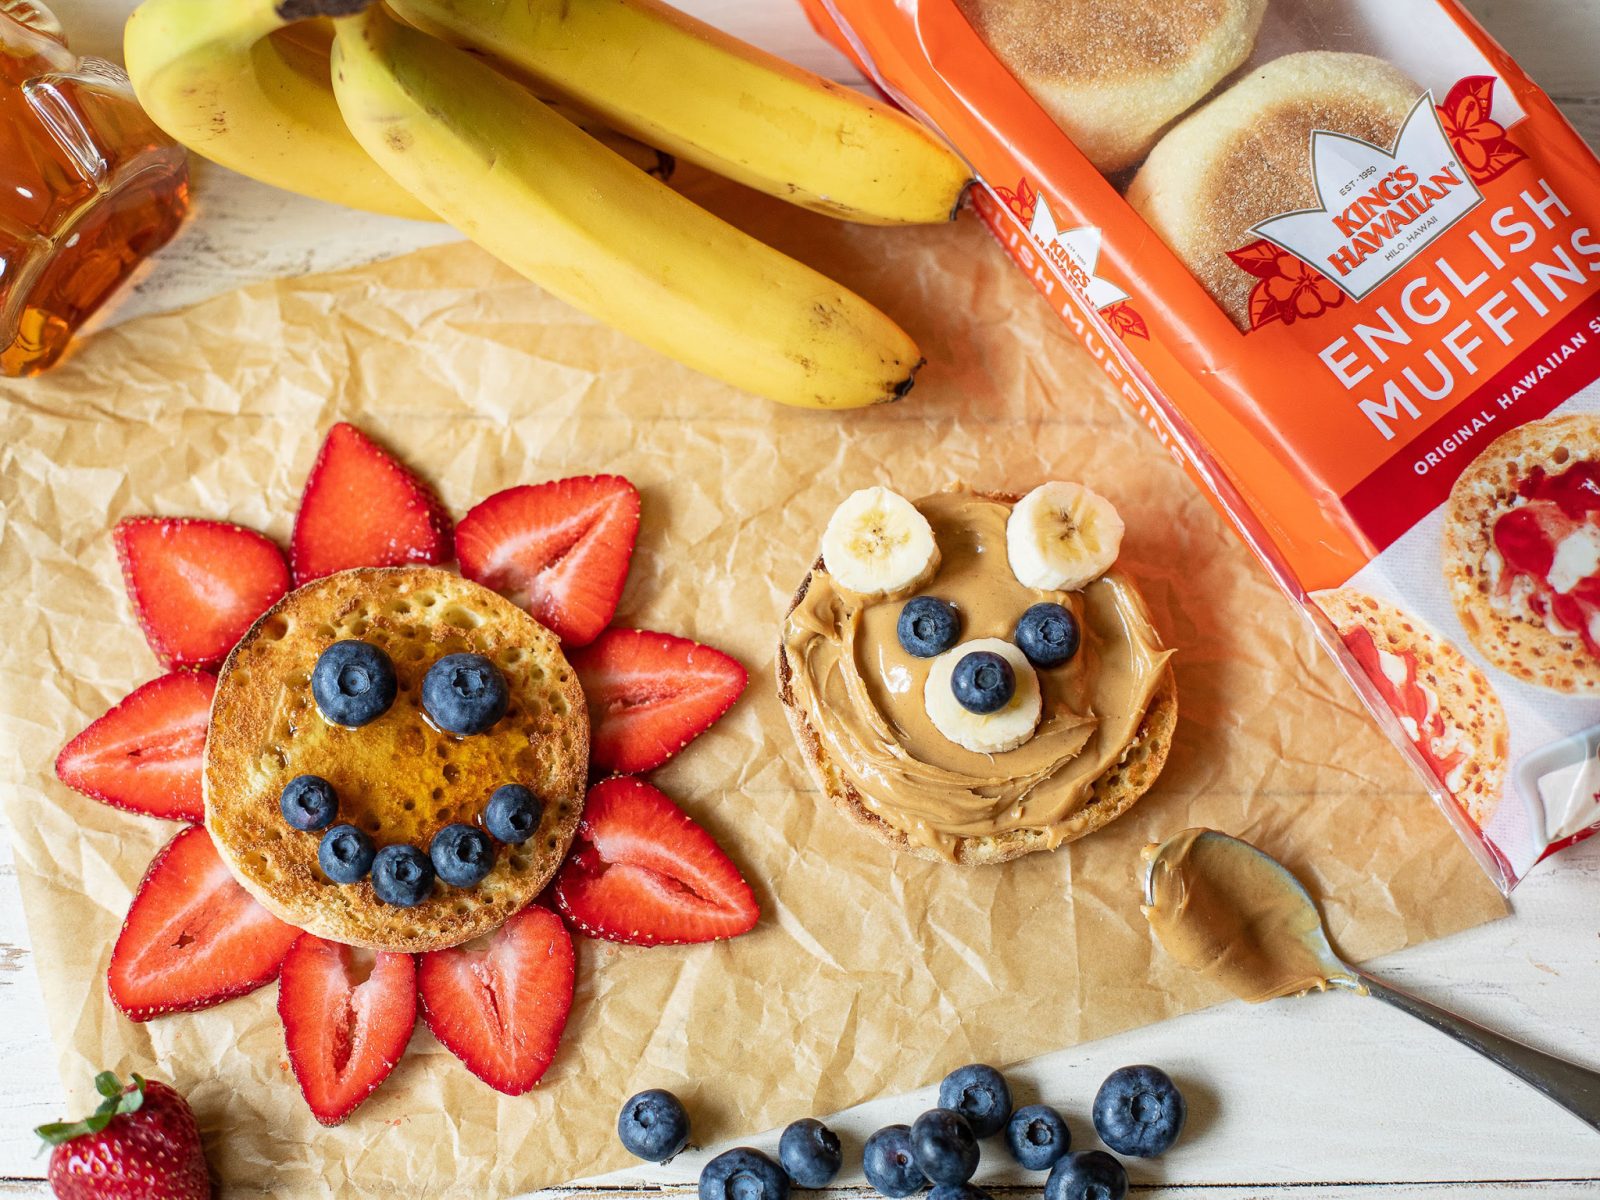 Send The Kids Back To School With The Great Taste Of King’s Hawaiian English Muffins – Available Now At Select Locations